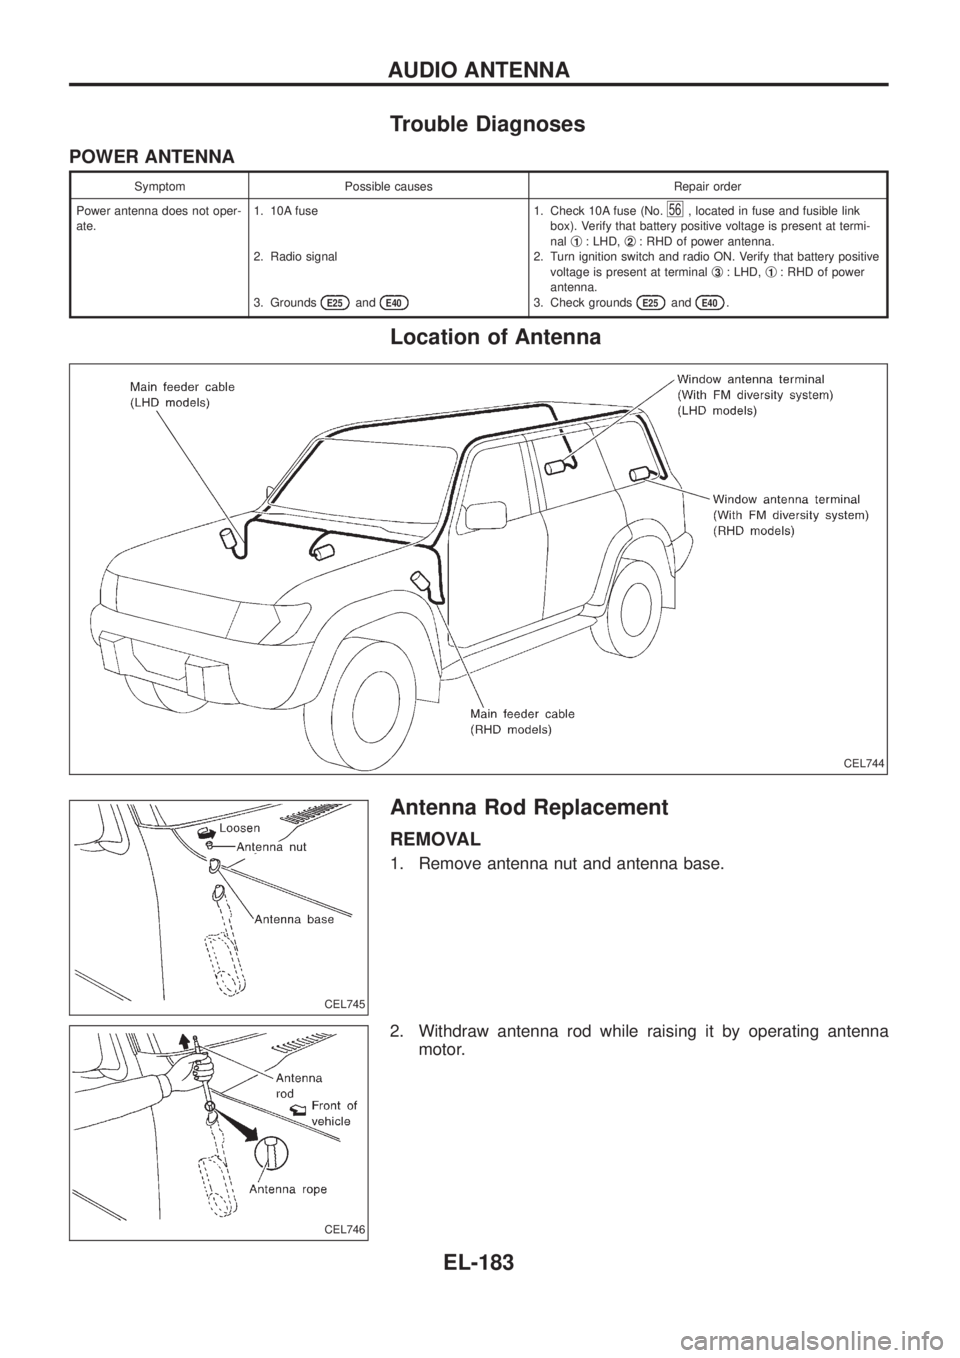 NISSAN PATROL 2006  Service Manual Trouble Diagnoses
POWER ANTENNA
Symptom Possible causes Repair order
Power antenna does not oper-
ate.1. 10A fuse
2. Radio signal
3. Grounds
E25andE40
1. Check 10A fuse (No.56, located in fuse and fus